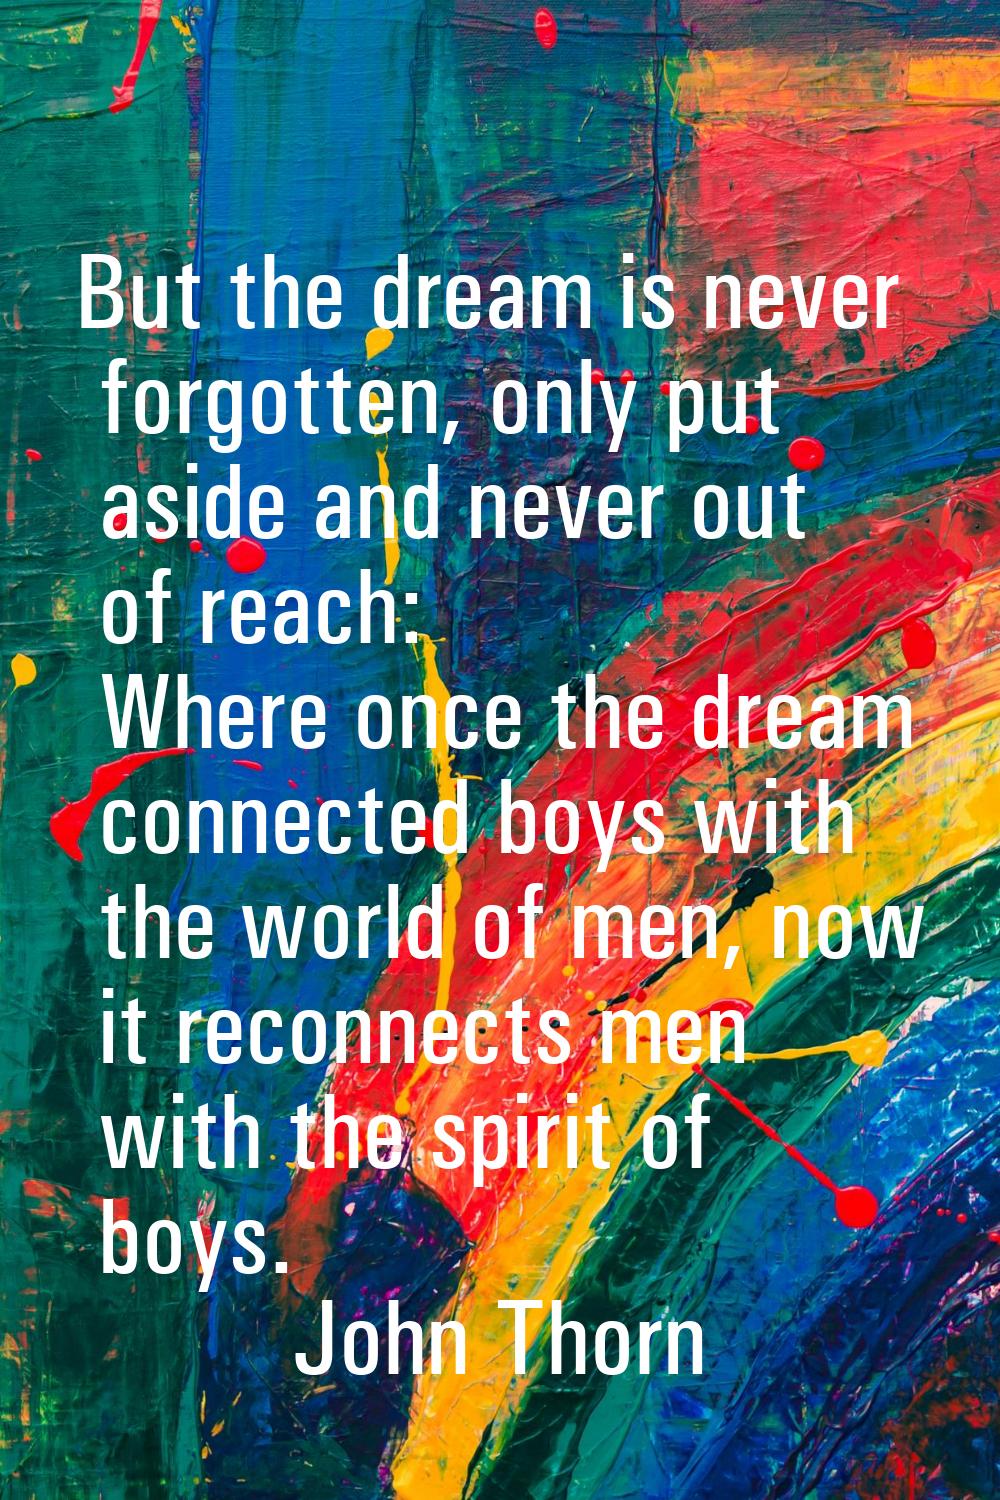 But the dream is never forgotten, only put aside and never out of reach: Where once the dream conne